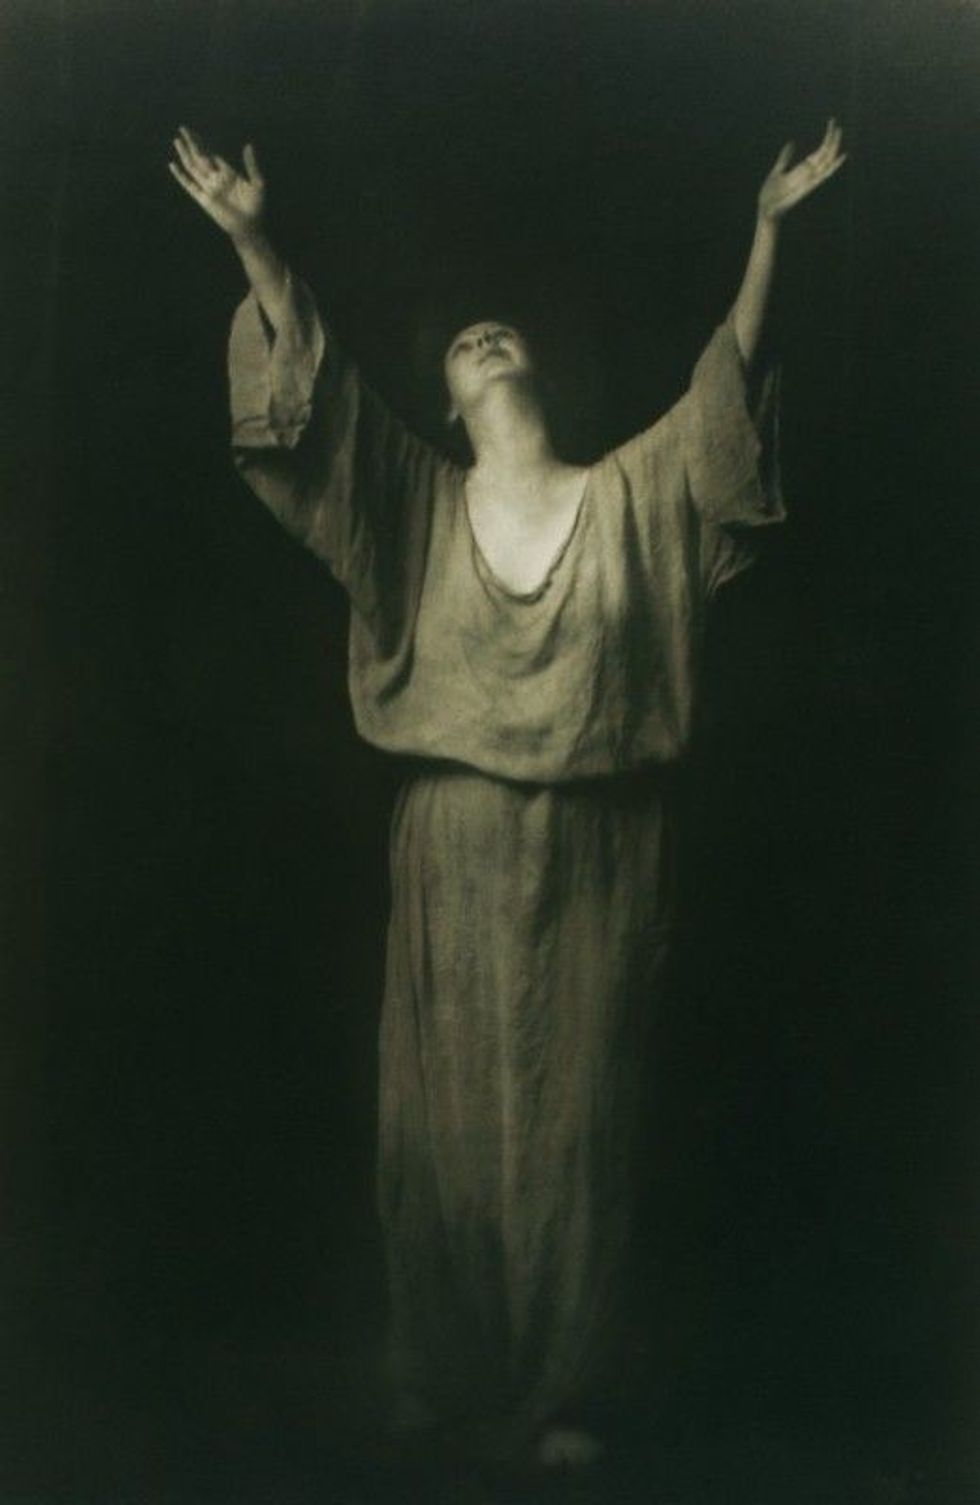 Famous choreographer, Isadora Duncan passed away on September 14, 1927, in Nice, France. She is remembered for her amazing dancing and performances.